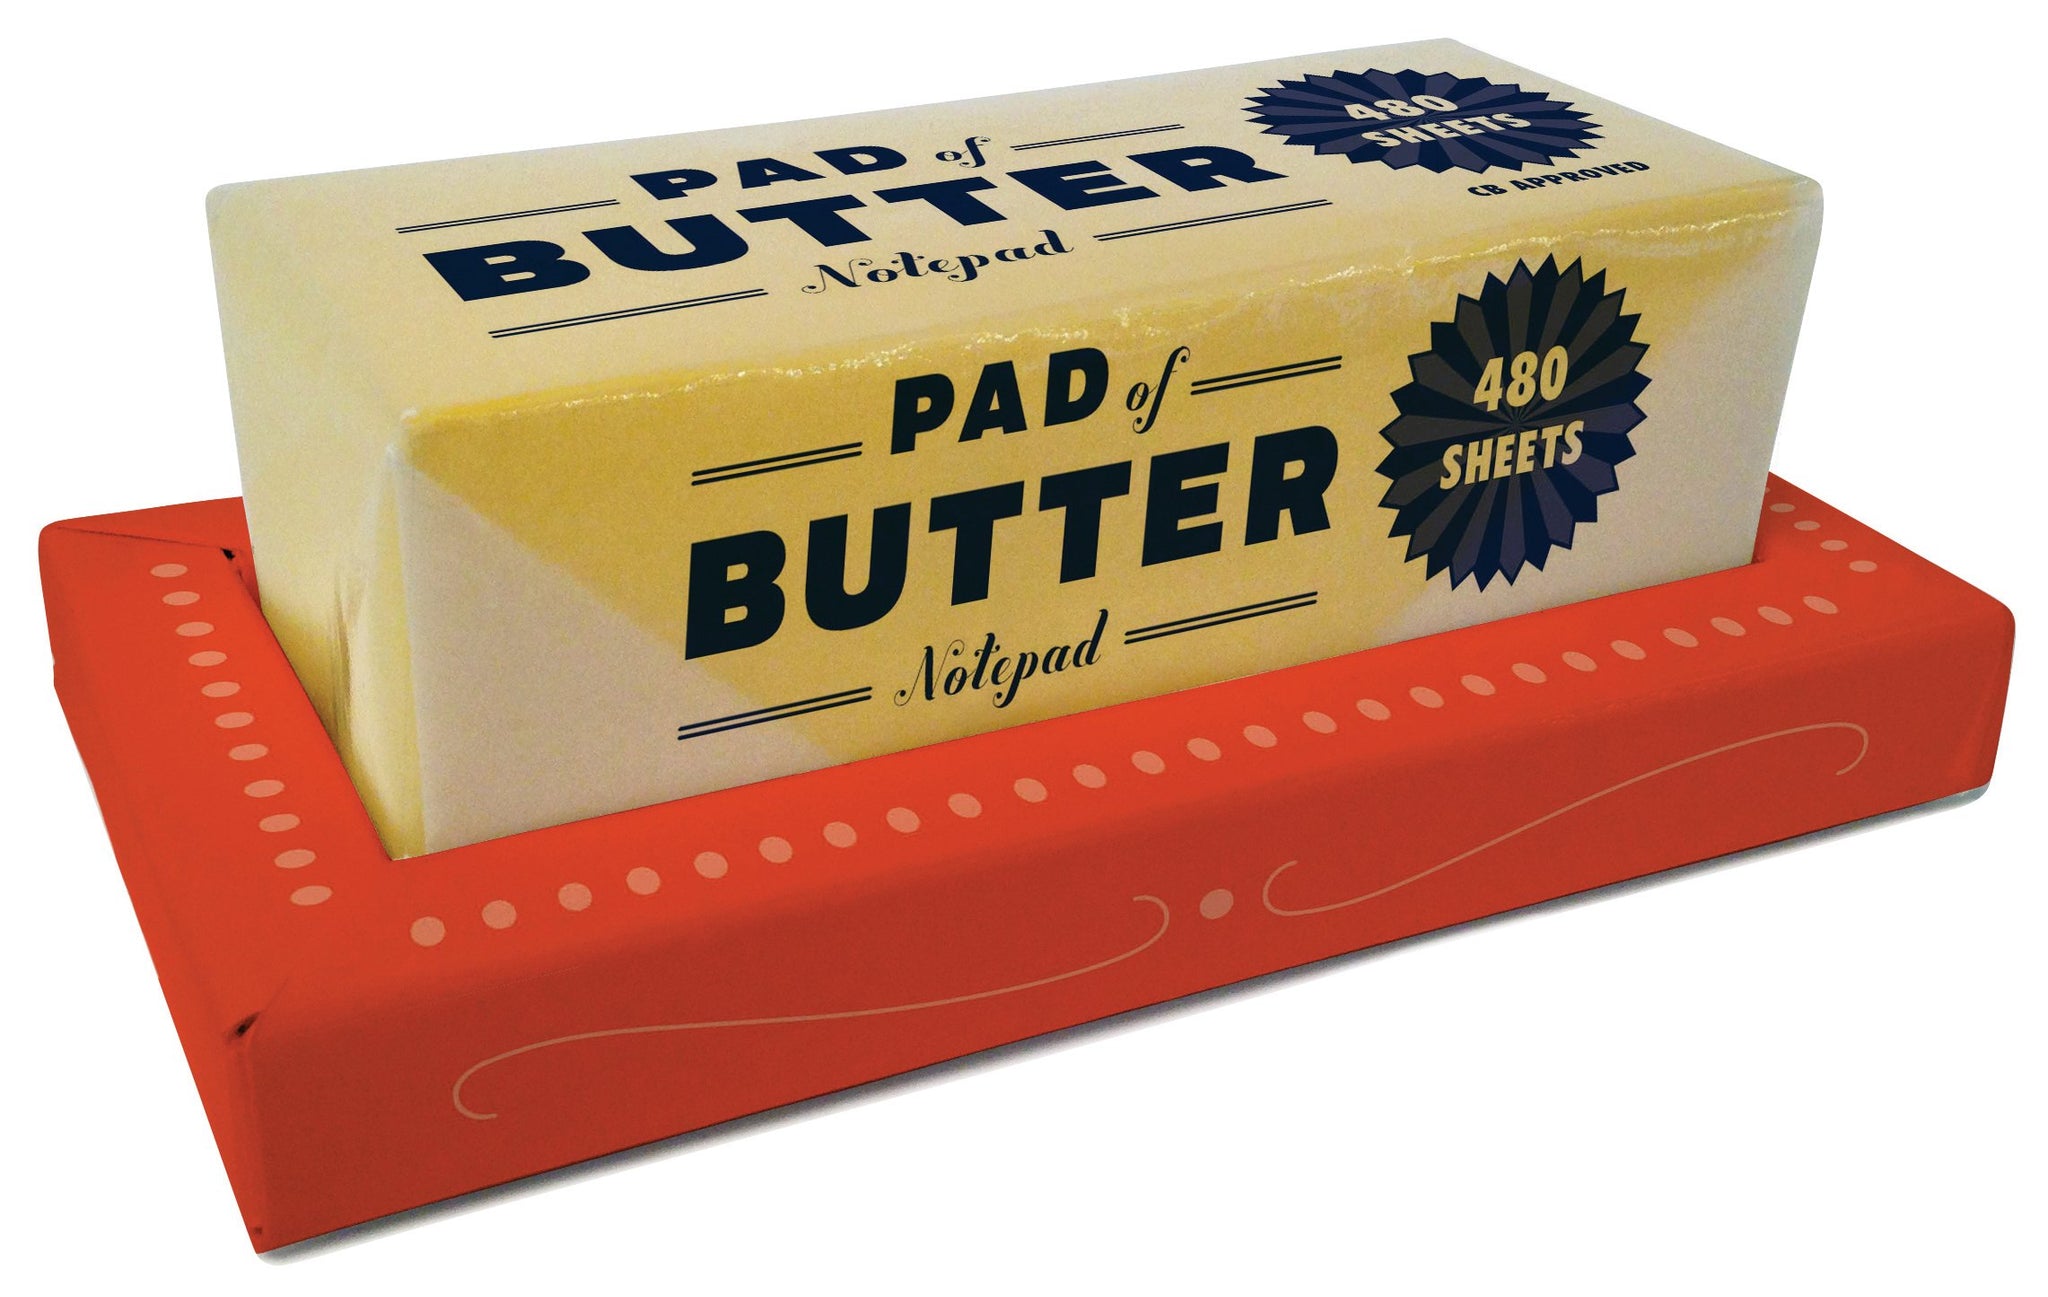 "Pad of Butter" Notepad